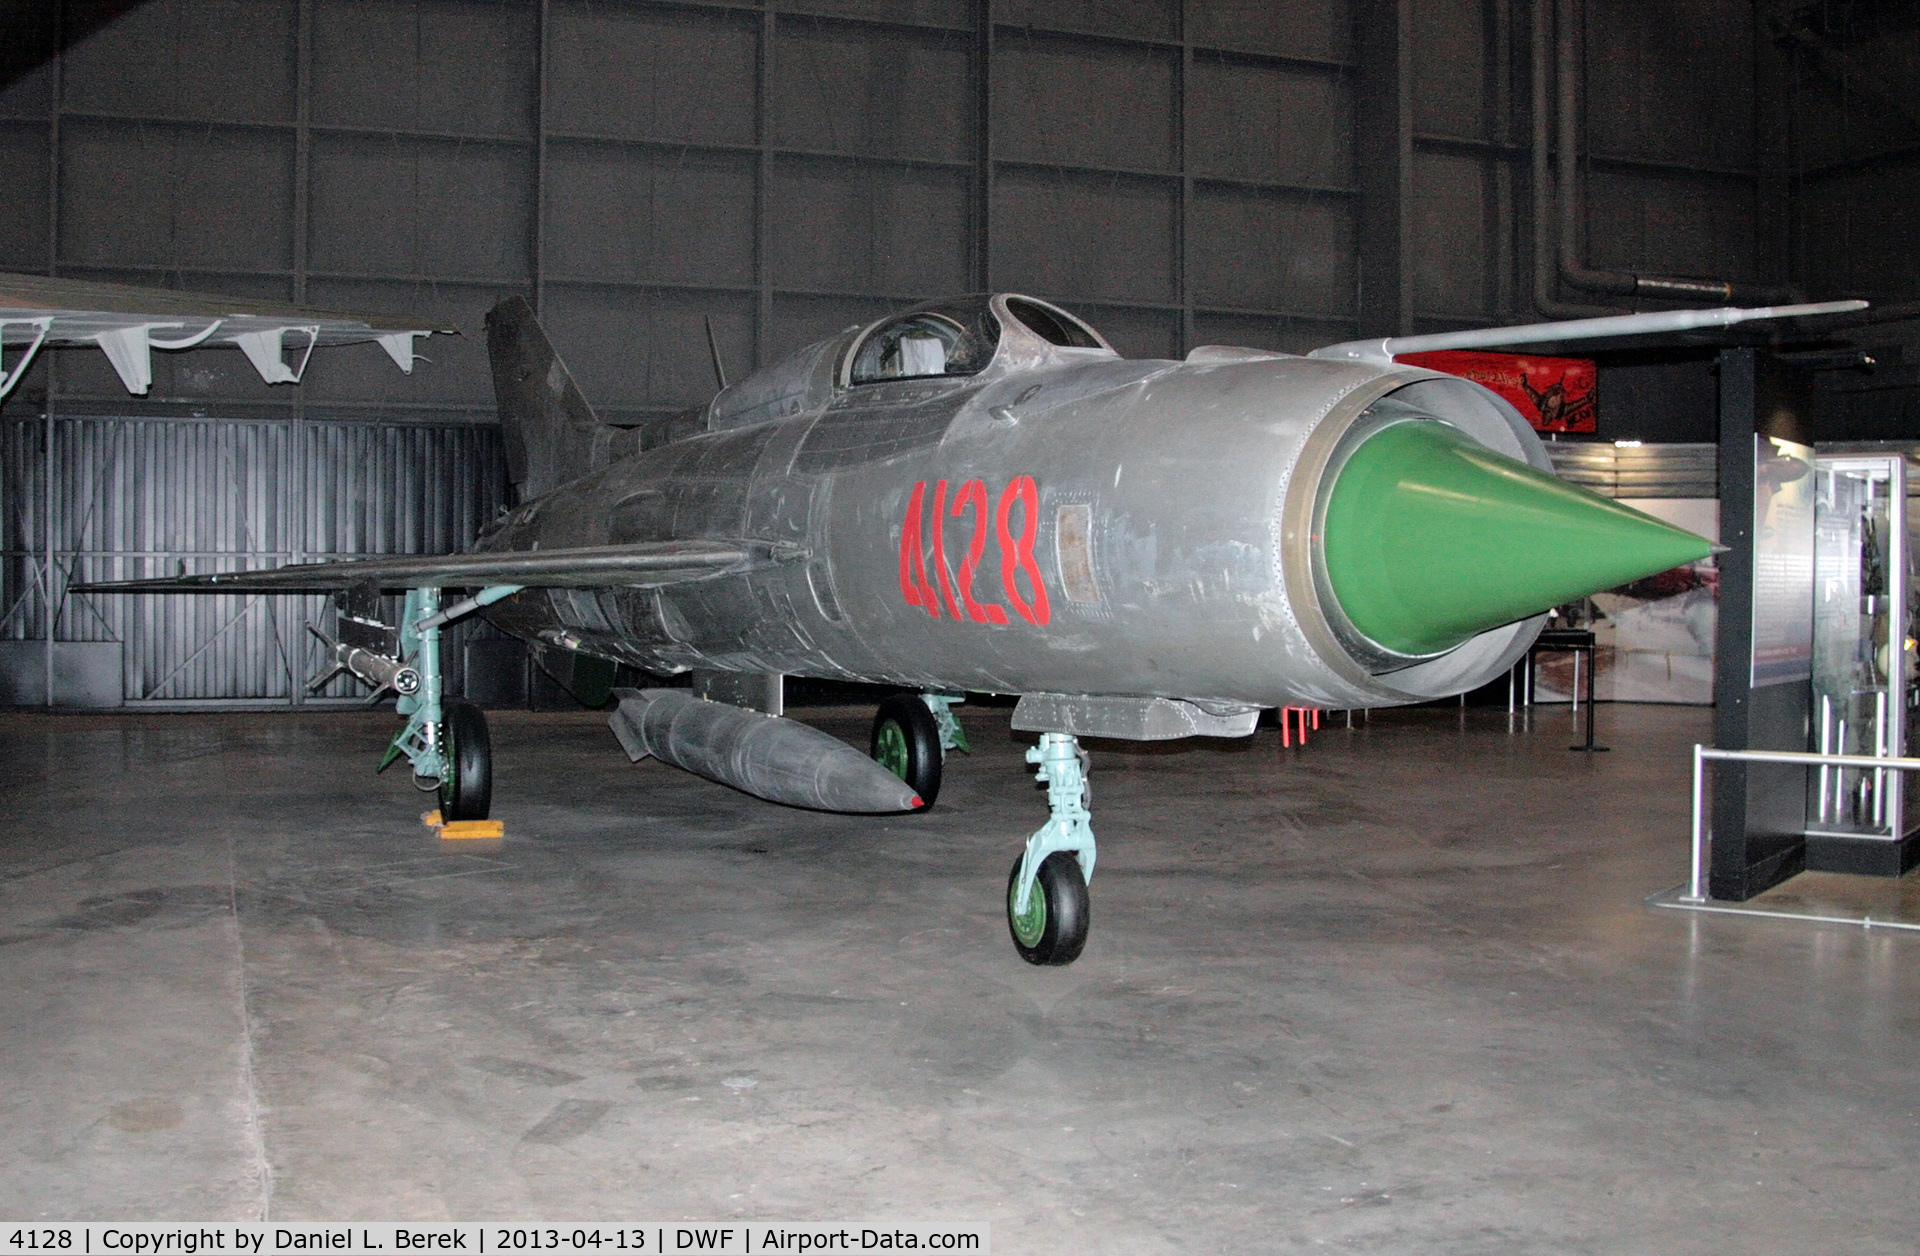 4128, Mikoyan-Gurevich MiG-21PF C/N 760408, The MiG-21 enjoyed a production run of 10,000 airframes over a 30-year span, from 1955 to 1988.  It was a formidable adversary.